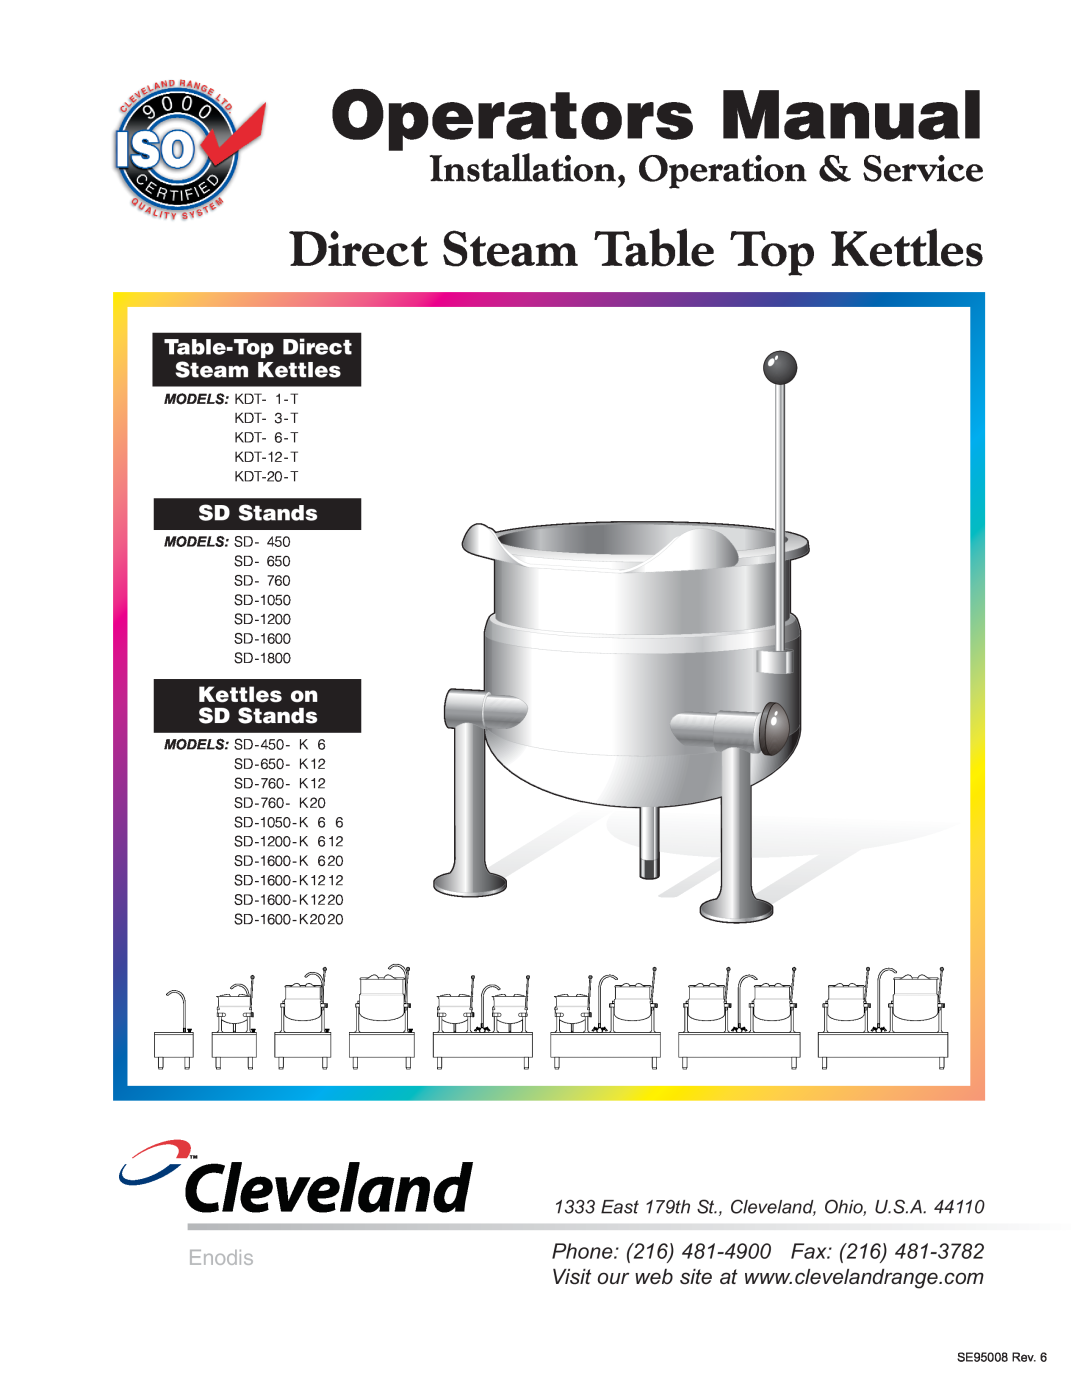 Cleveland Range SD-1600-K 620 manual Operators Manual, Cleveland, Direct Steam Table Top Kettles, SD Stands, Enodis 